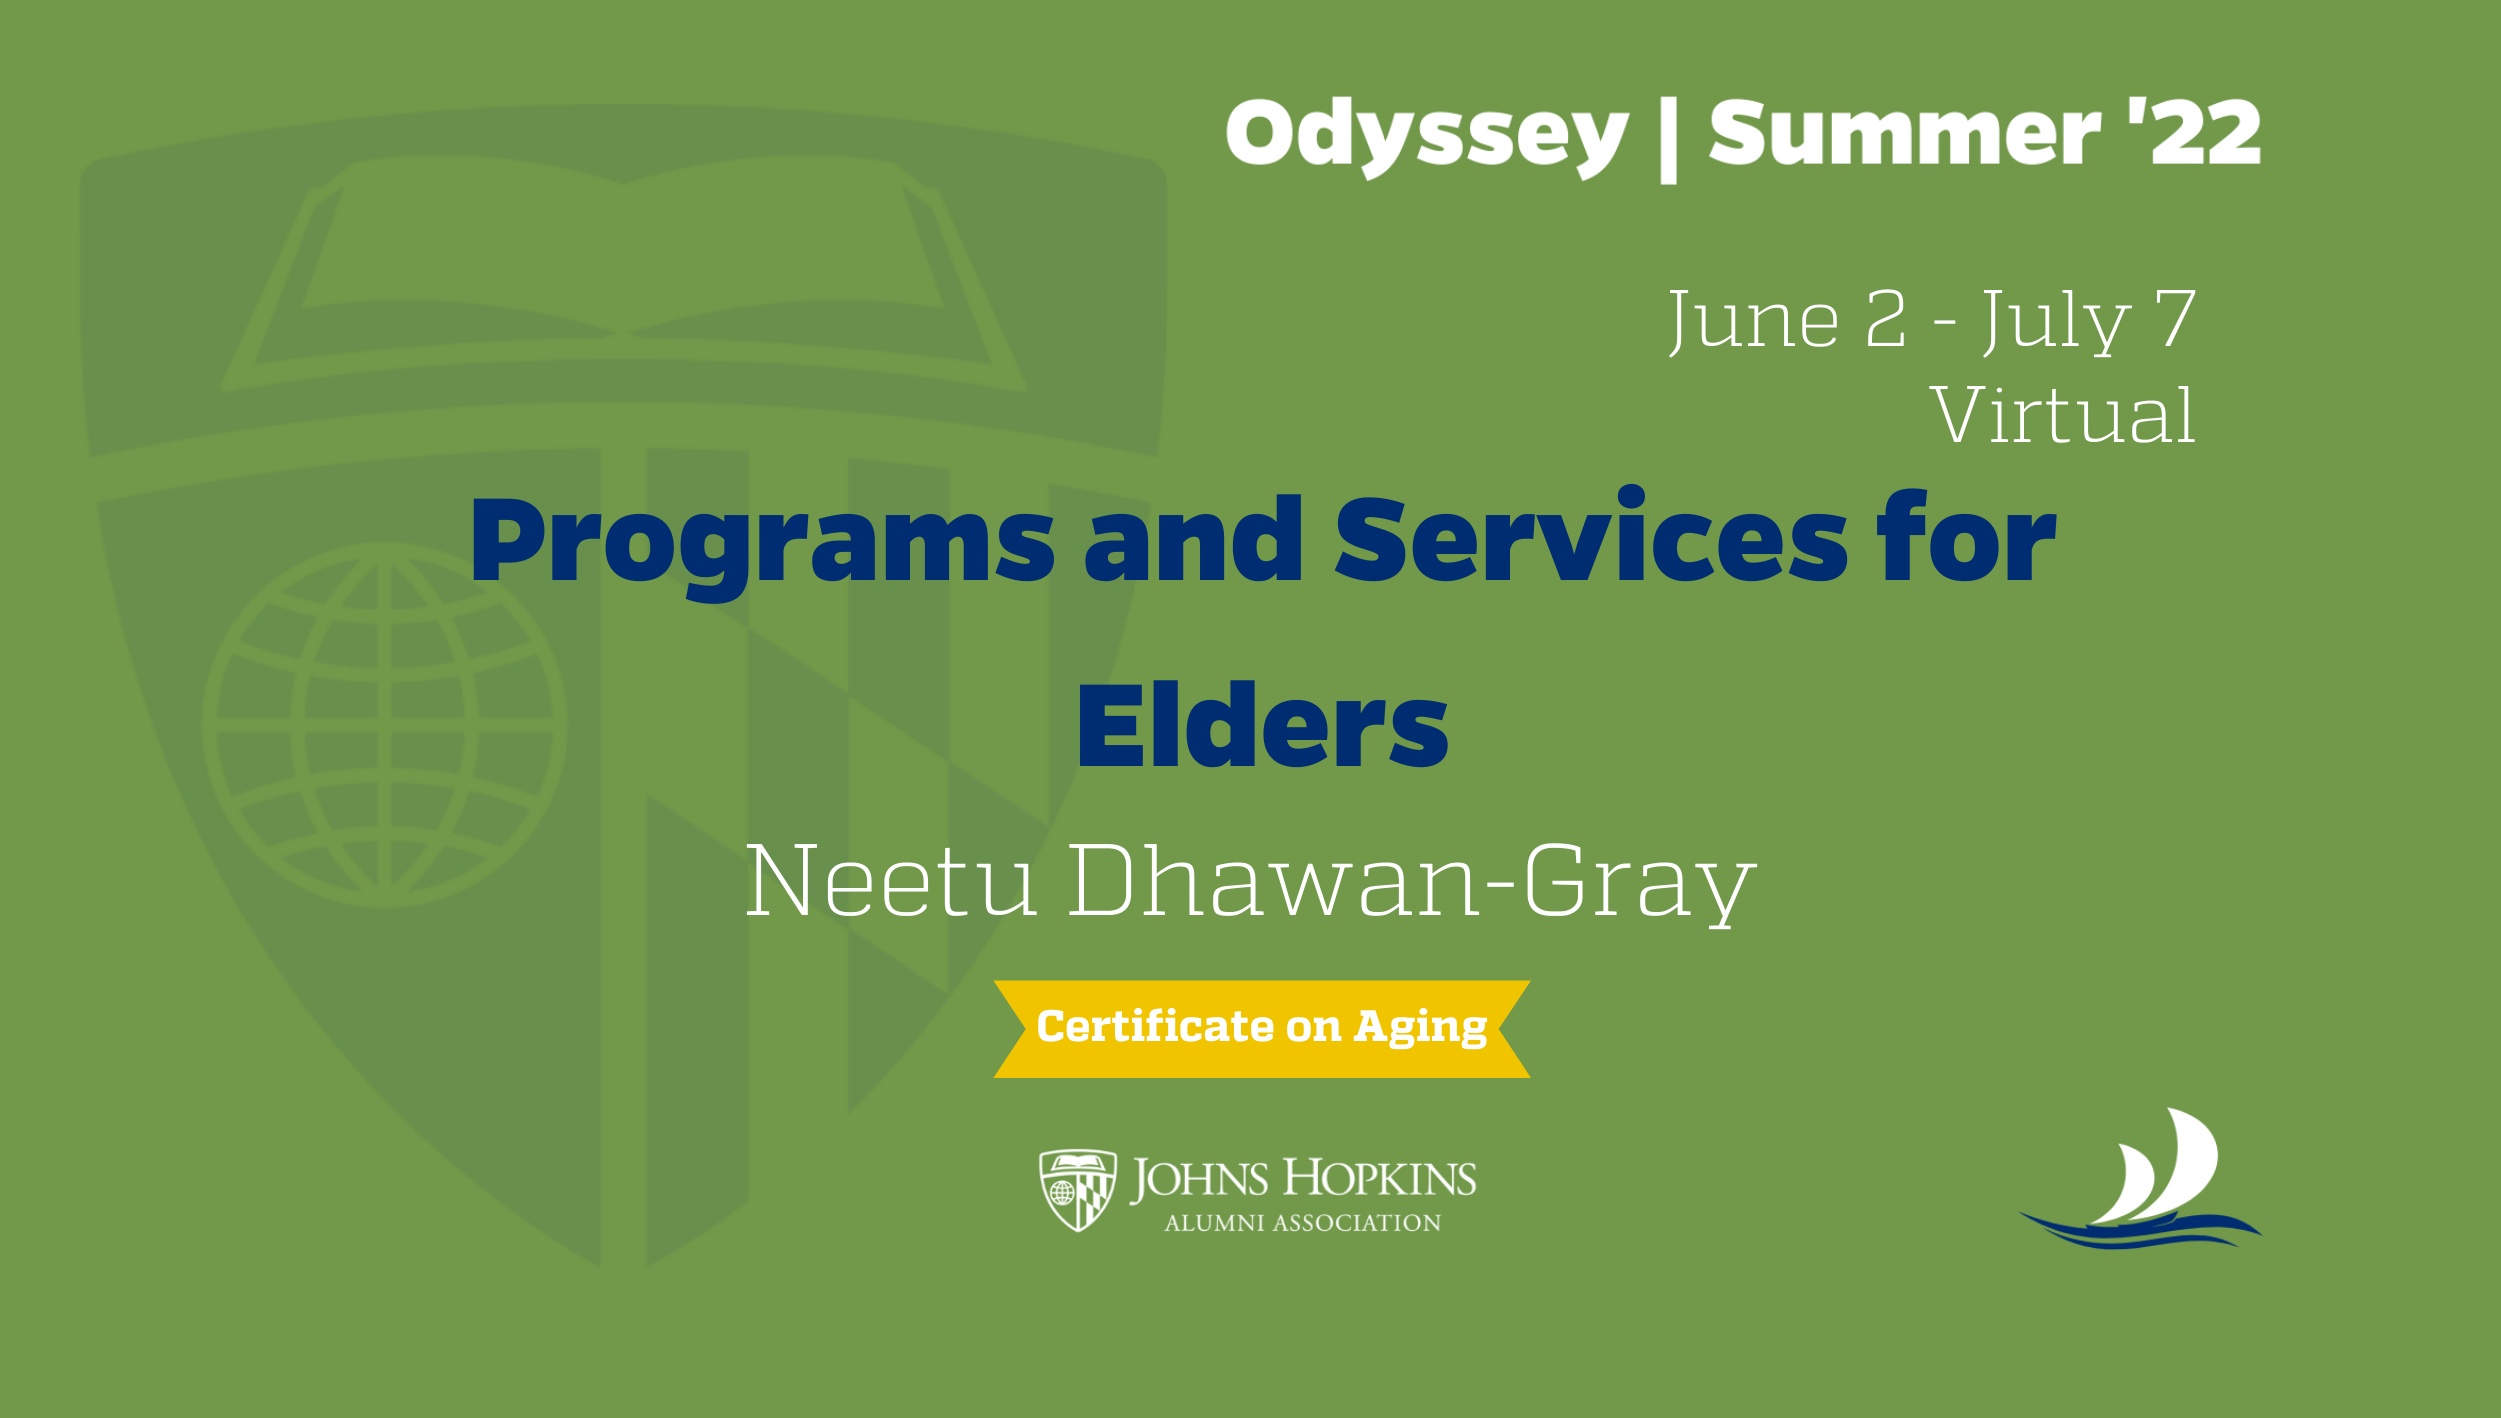 Certificate on Aging - Programs and Resources for Elders